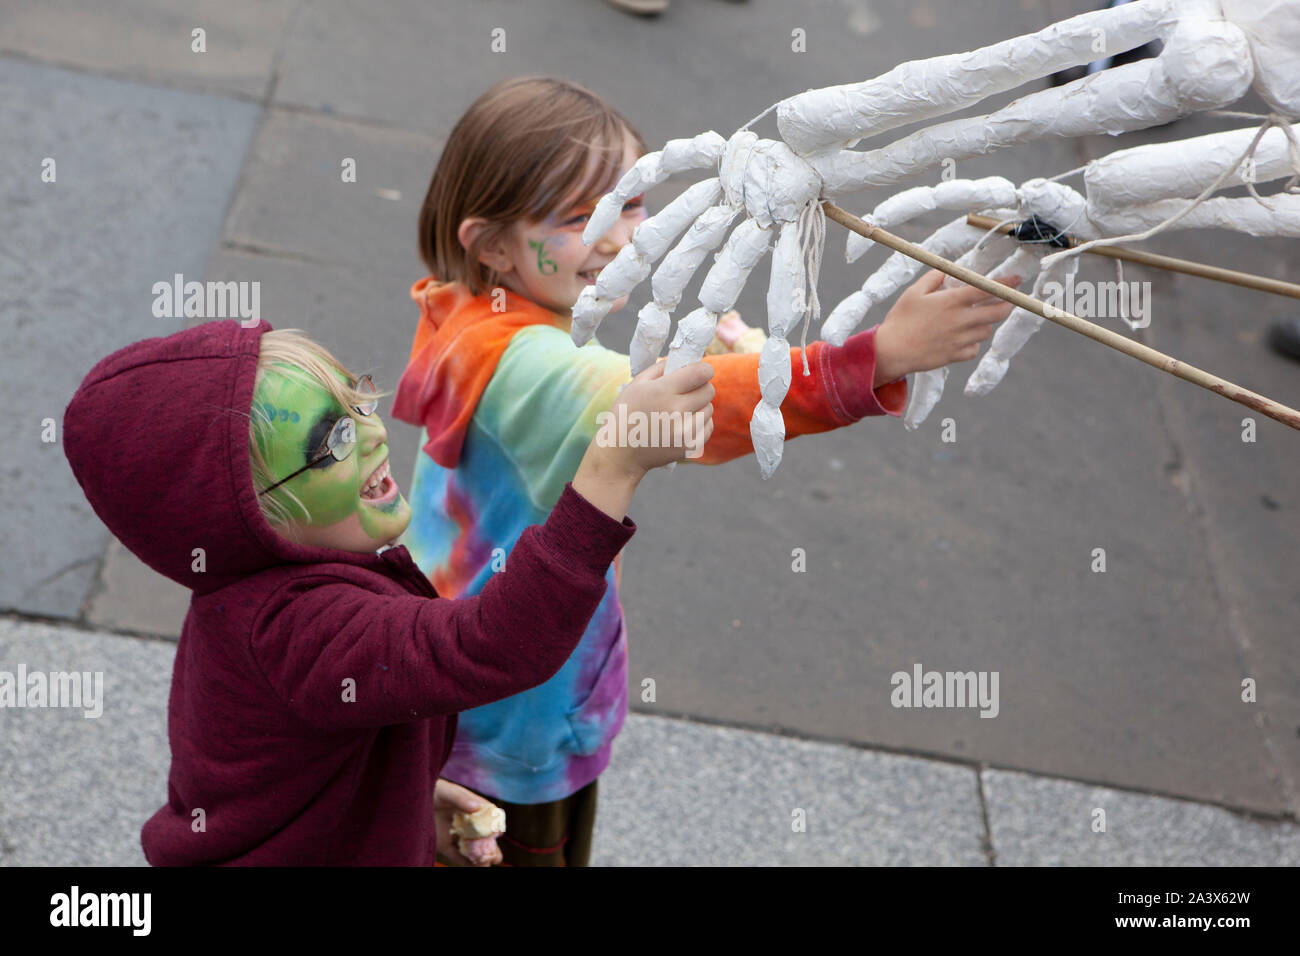 Extinction Rebellion climate protestors continued their occupation of Trafalgar Square for a fourth day, with some super-gluing their hands to the road to block traffic. These children were delighted to shake hands with a skeleton puppet from the XR Bones parade. Stock Photo